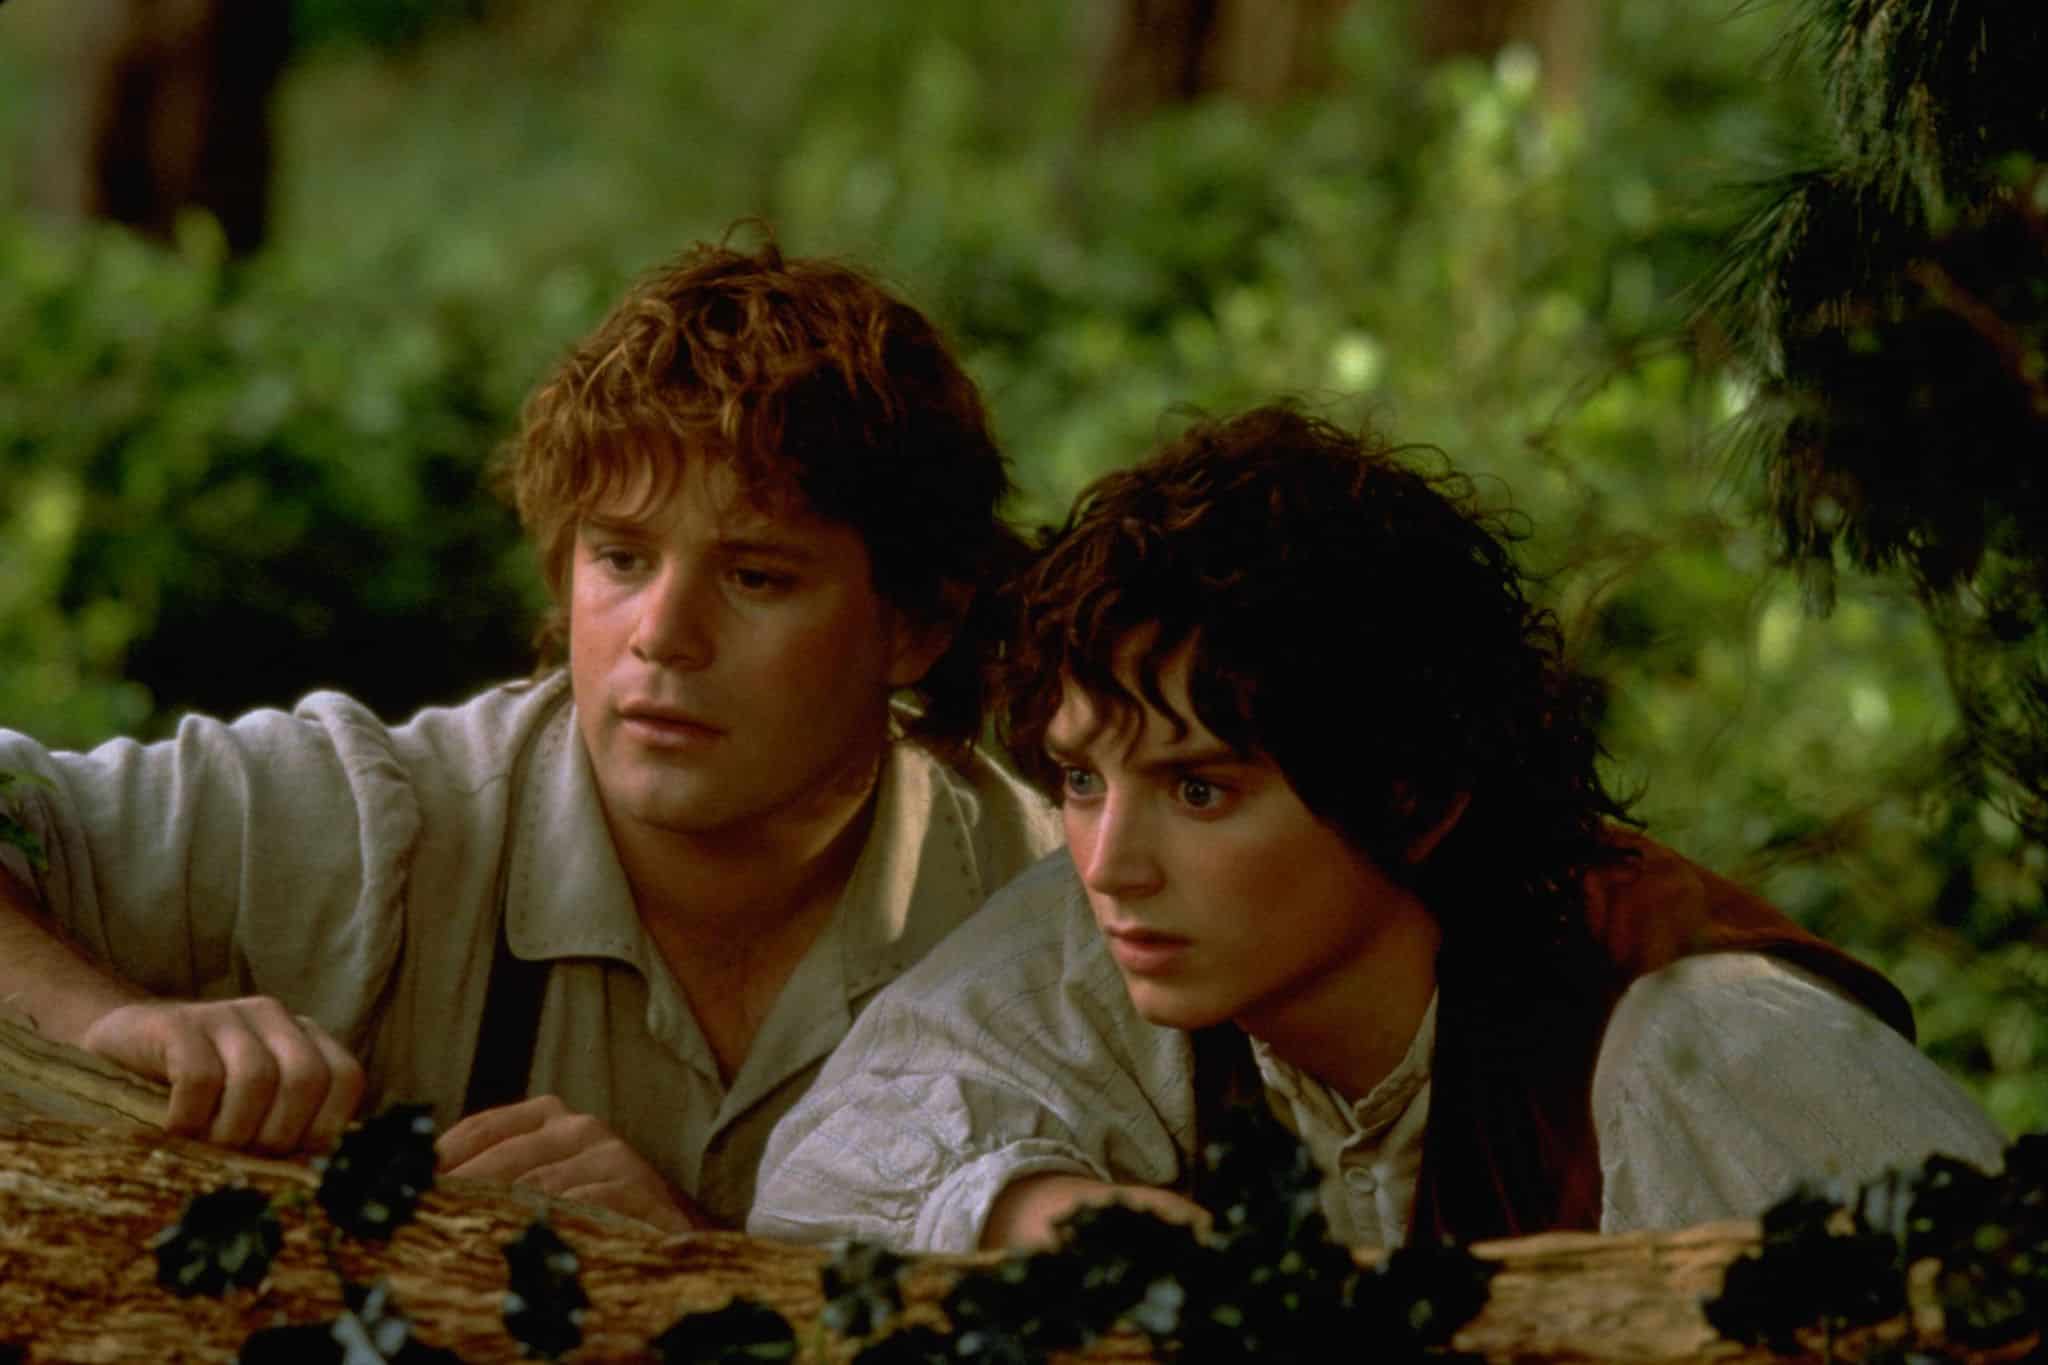 Sean Astin and Elijah Wood hide behind a tree branch in this image from New Line Cinema.